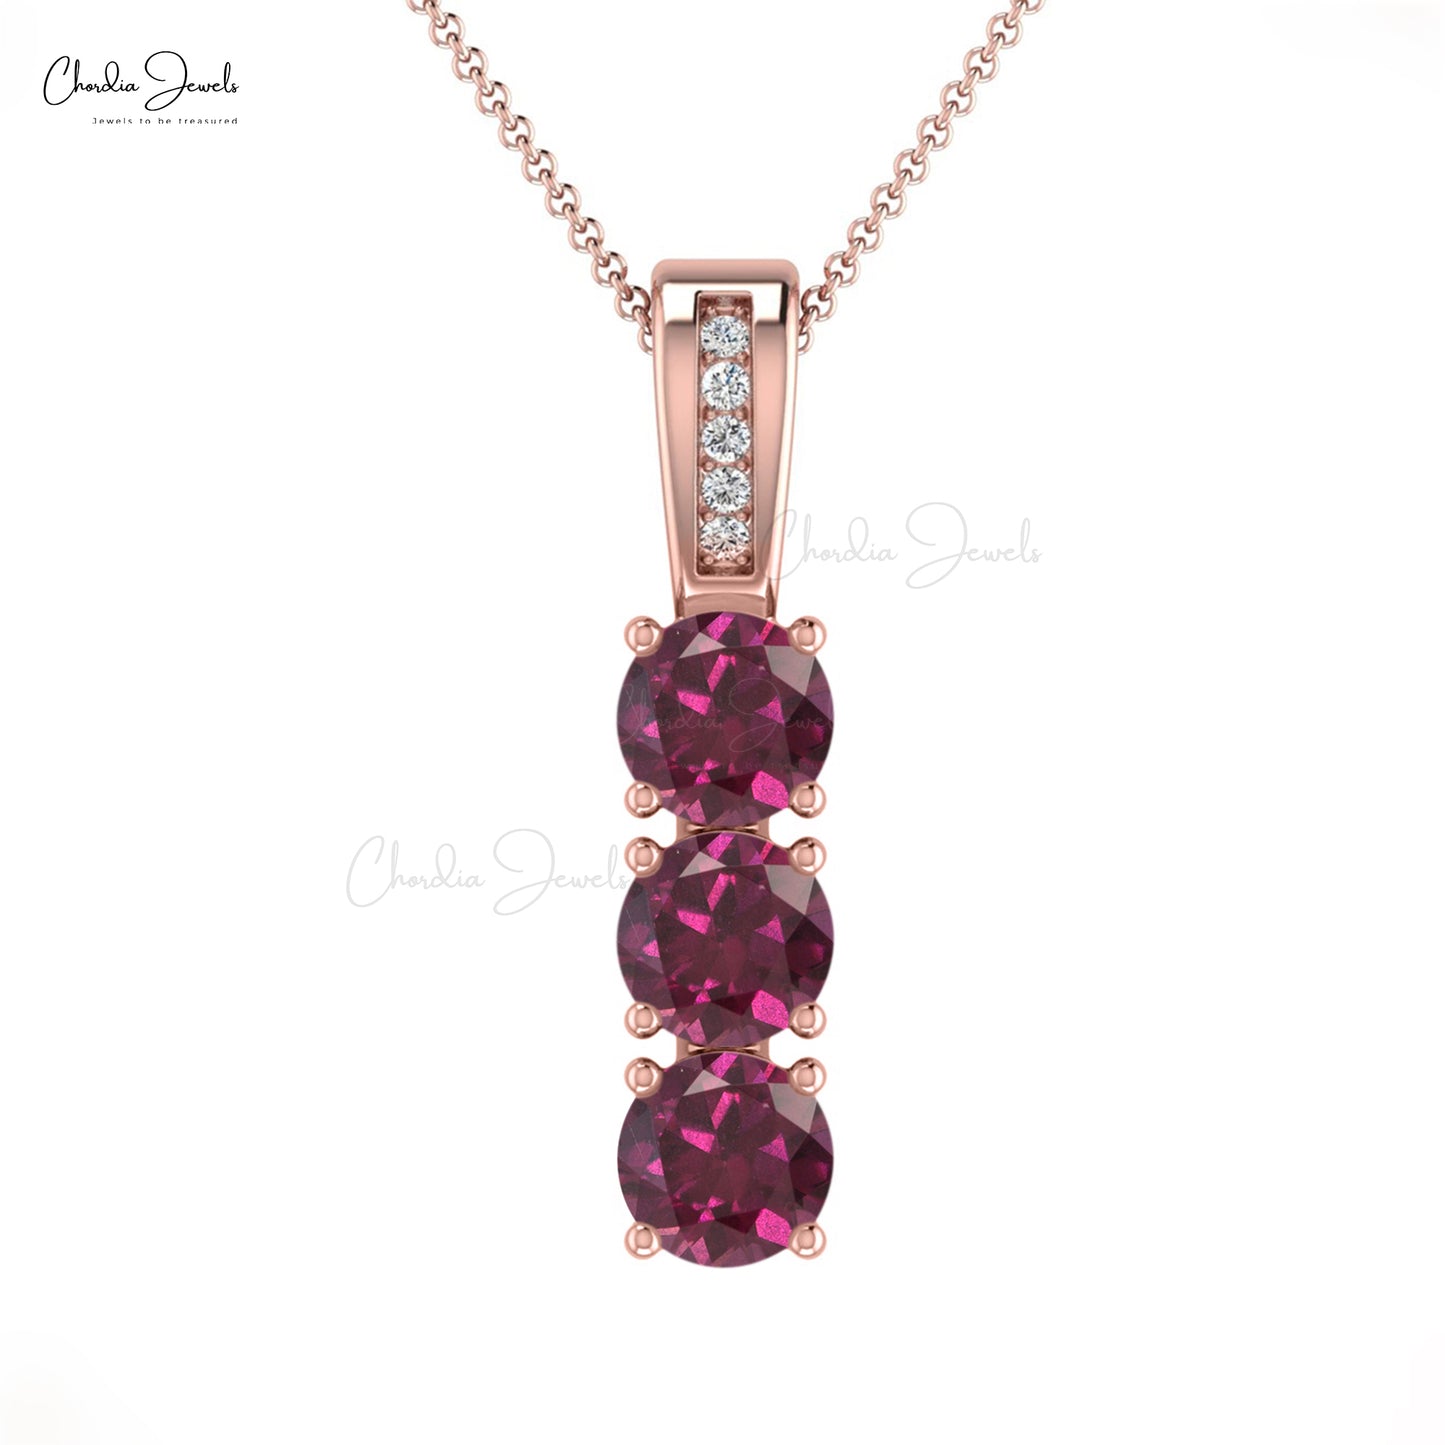 Round Rhodolite Garnet & Diamond Accented Handcrafted Pendant in 14k Solid Gold Jewelry